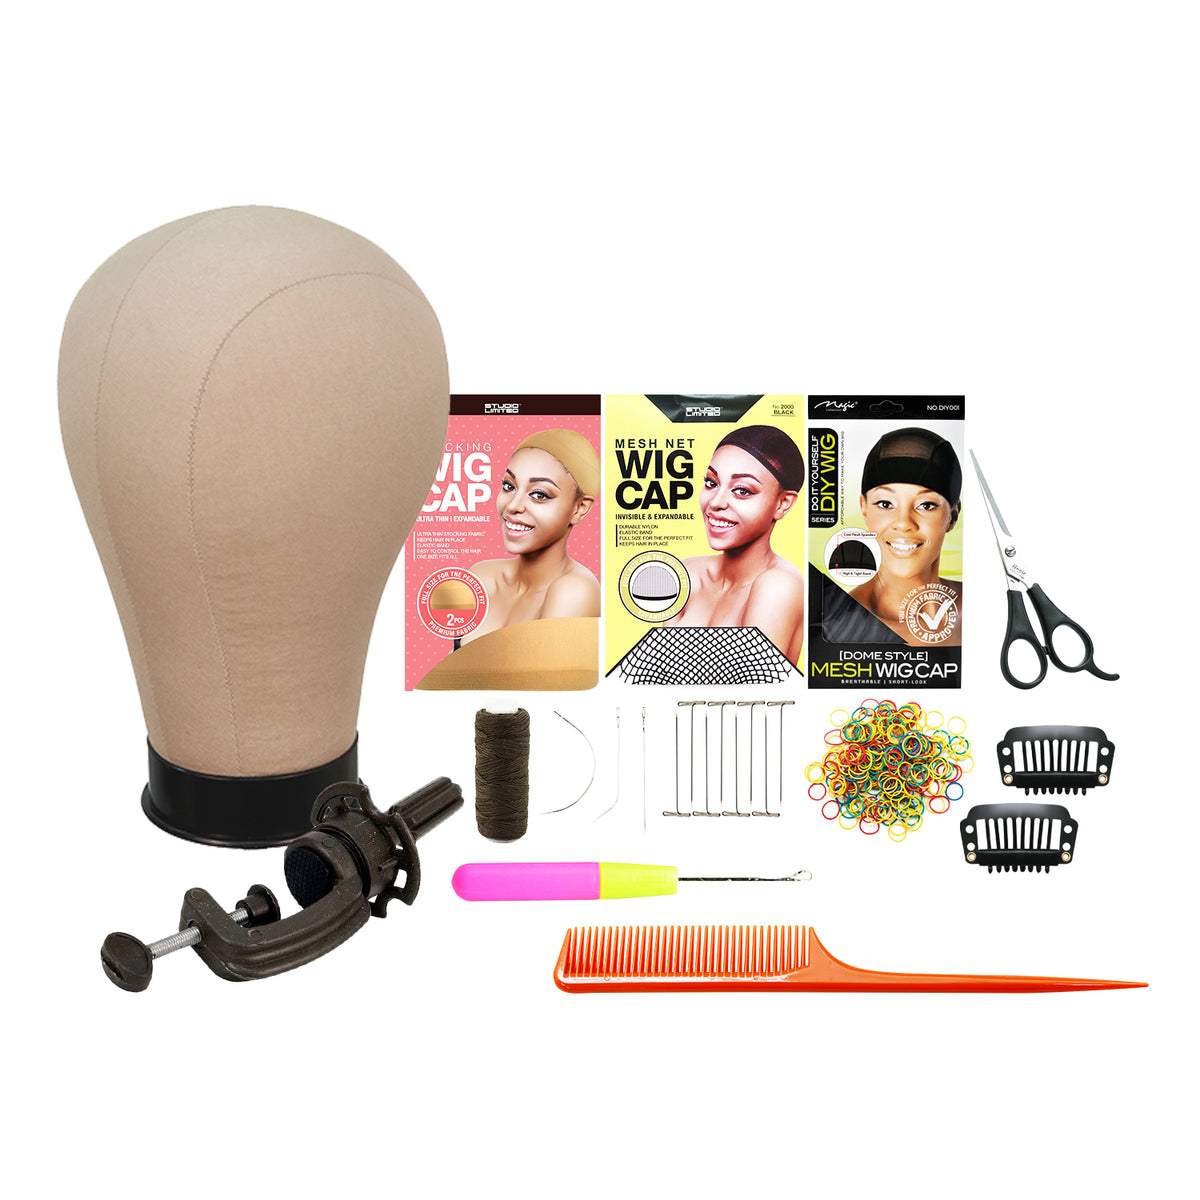 AliLeader Wig Making Kit Canvas Block Head With Stand Mannequin Head Diy  Dome Cap Combs Needles T Pins Thread Clamp From Caohu, $31.51